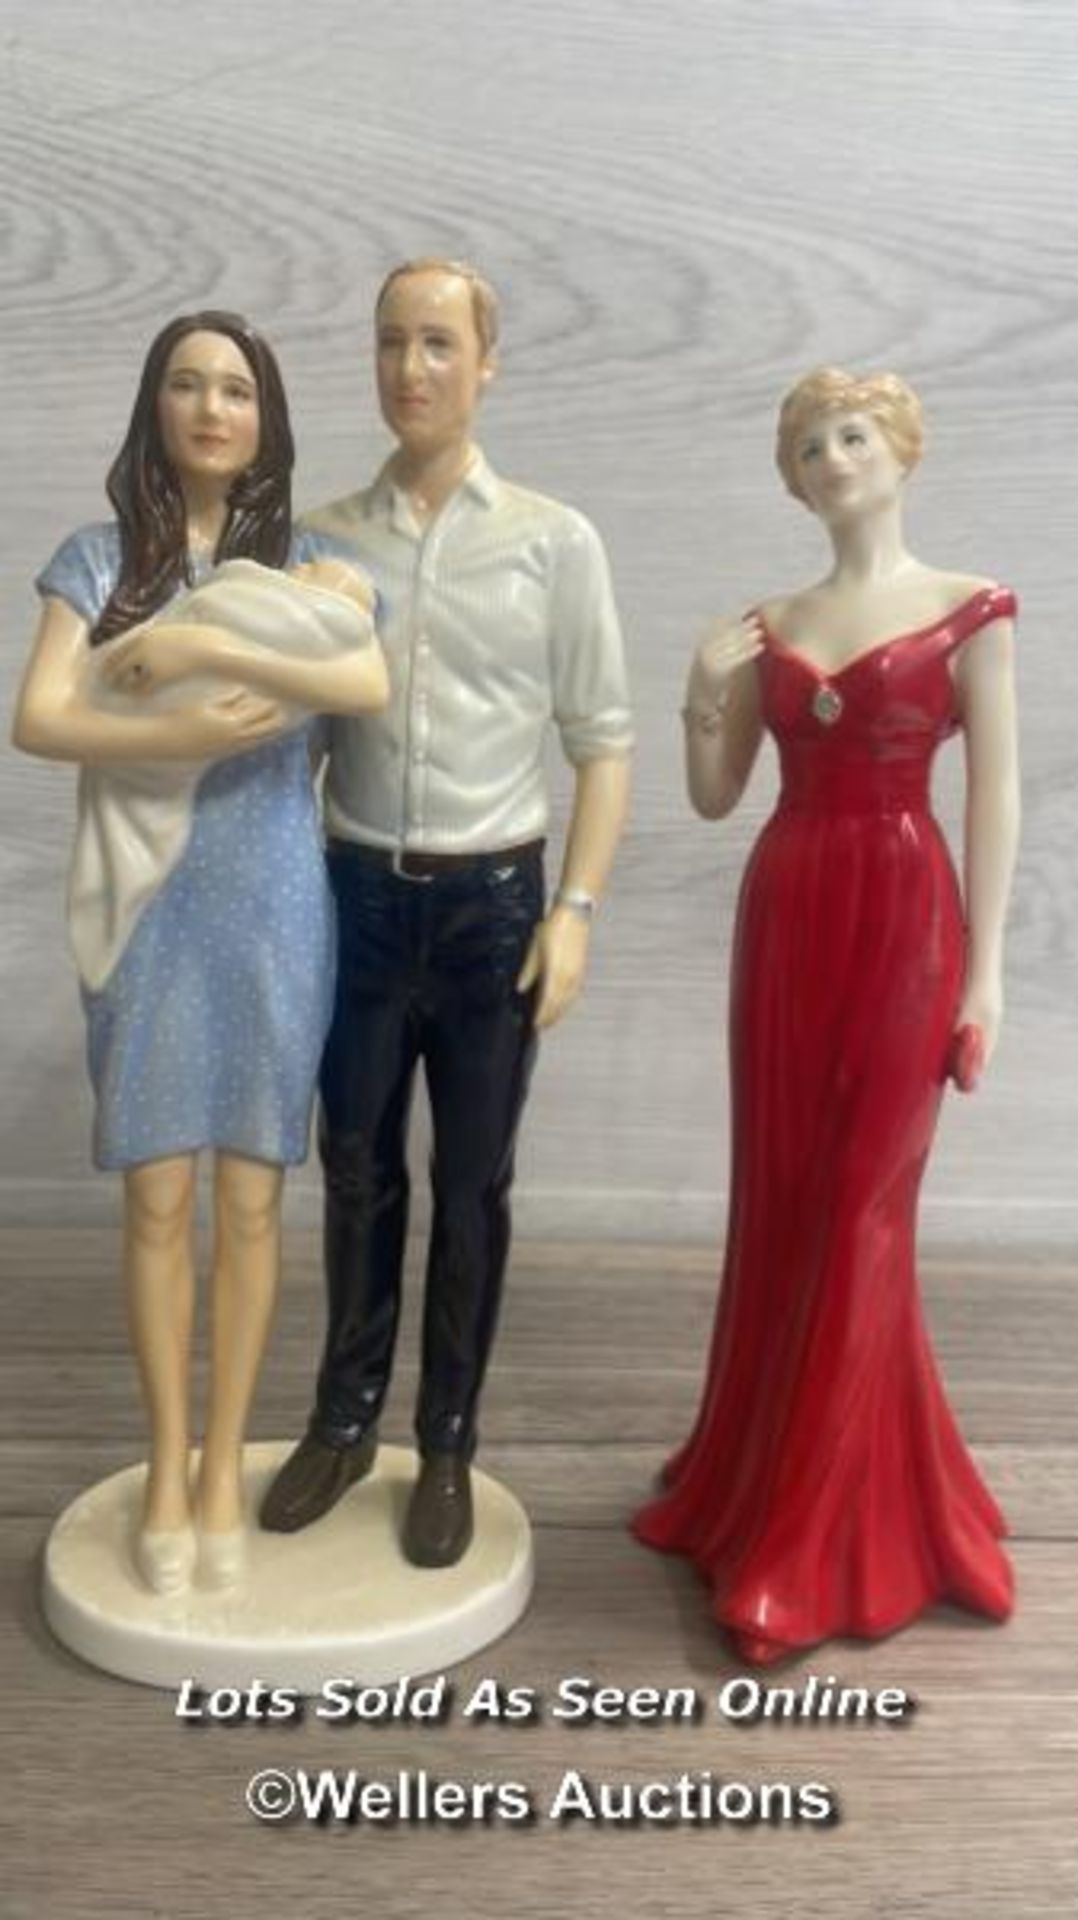 ROYAL DOULTON FIGURINE "PRINCE GEORGE A ROYAL BIRTH" AND ROYAL WORCESTER "DIANA PRINCESS OF WALES"